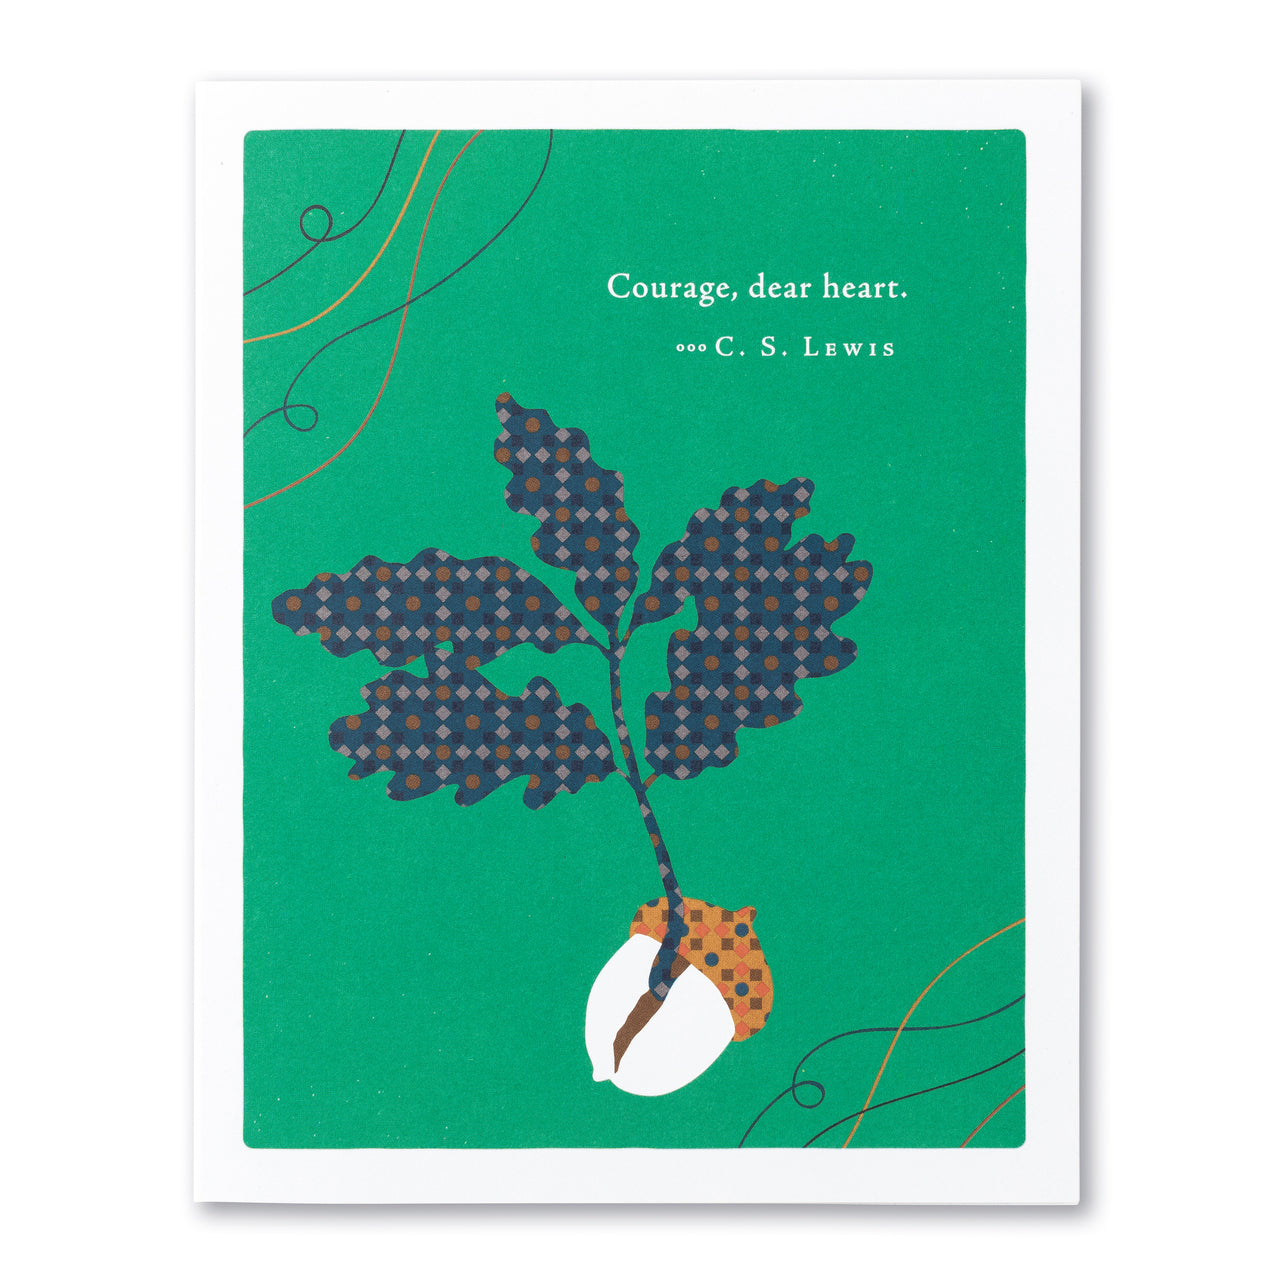 Positively Green Greeting Card - Encouragement - "Courage, Dear Heart" - C.S. Lewis - Mellow Monkey